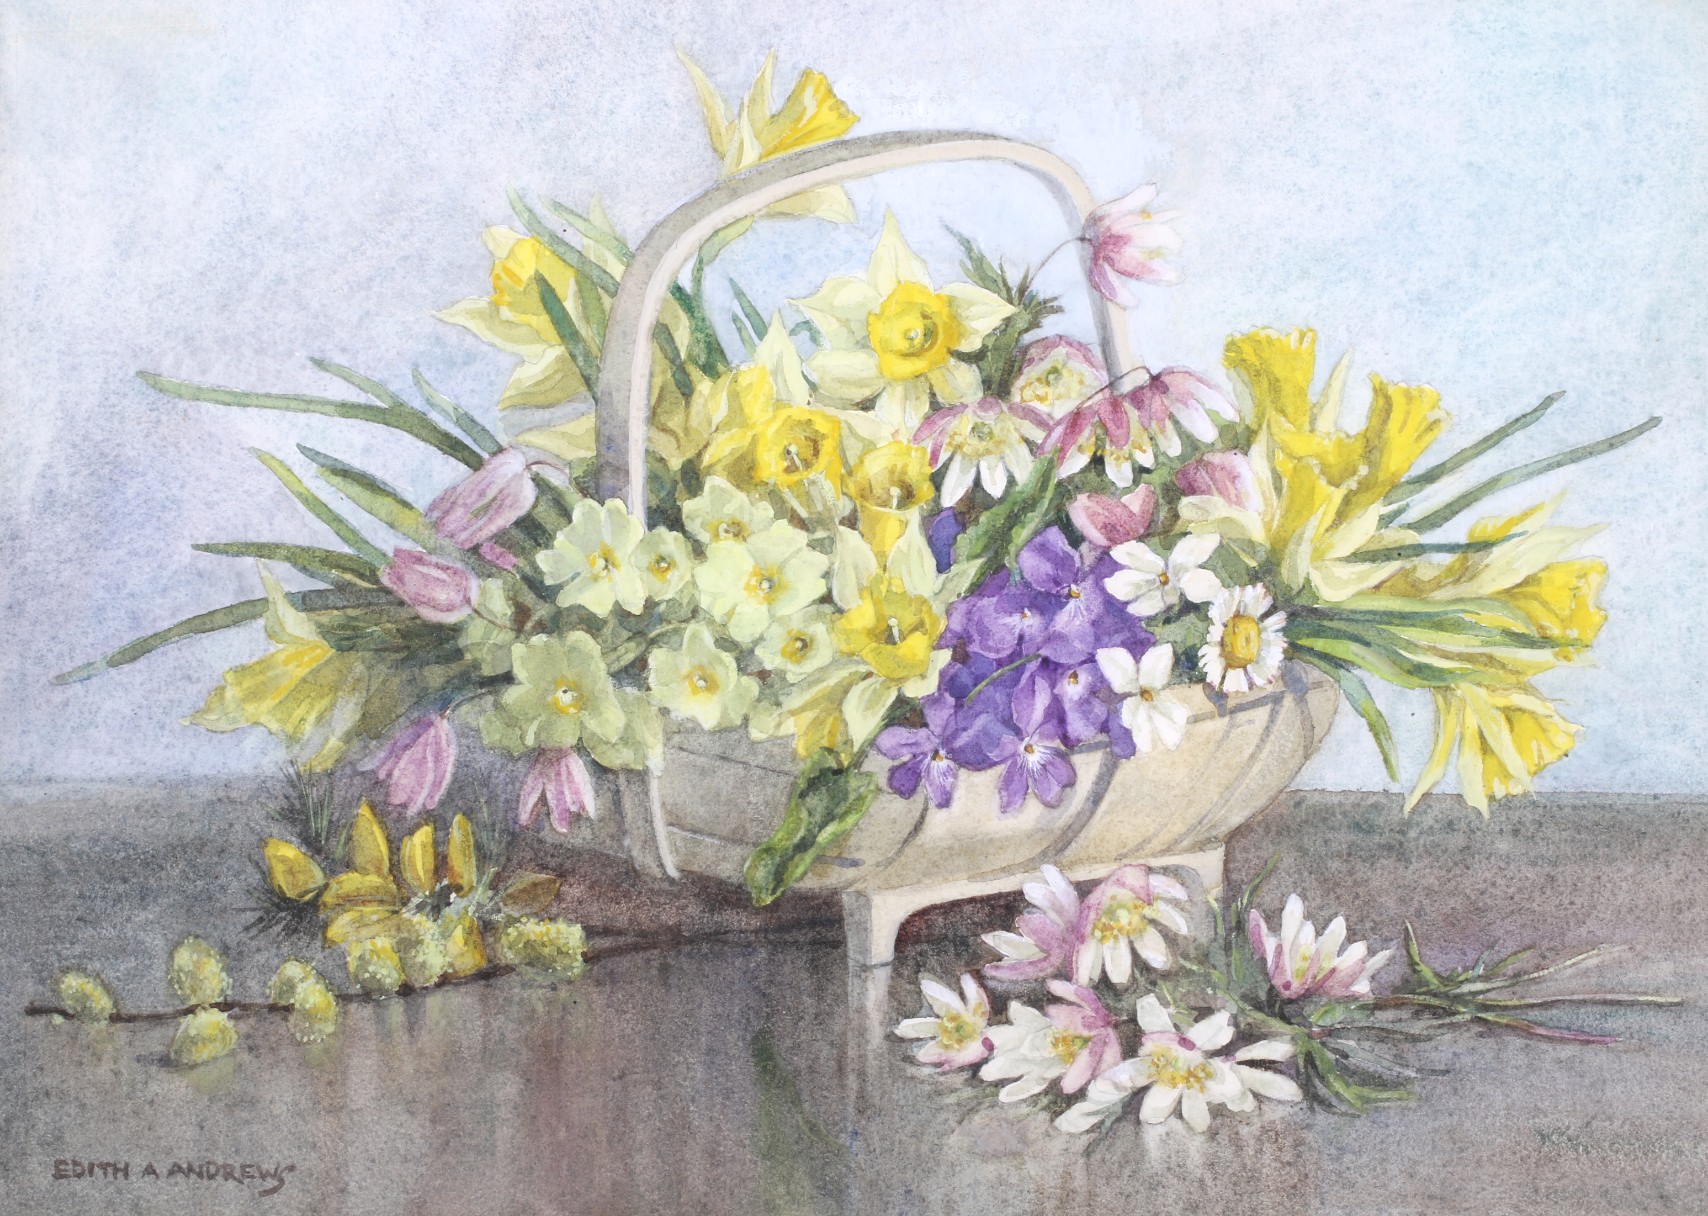 Edith Alice Andrews (exh. 1900-1940), watercolour on paper. 'A spring basketful', 25cm x 35cm.